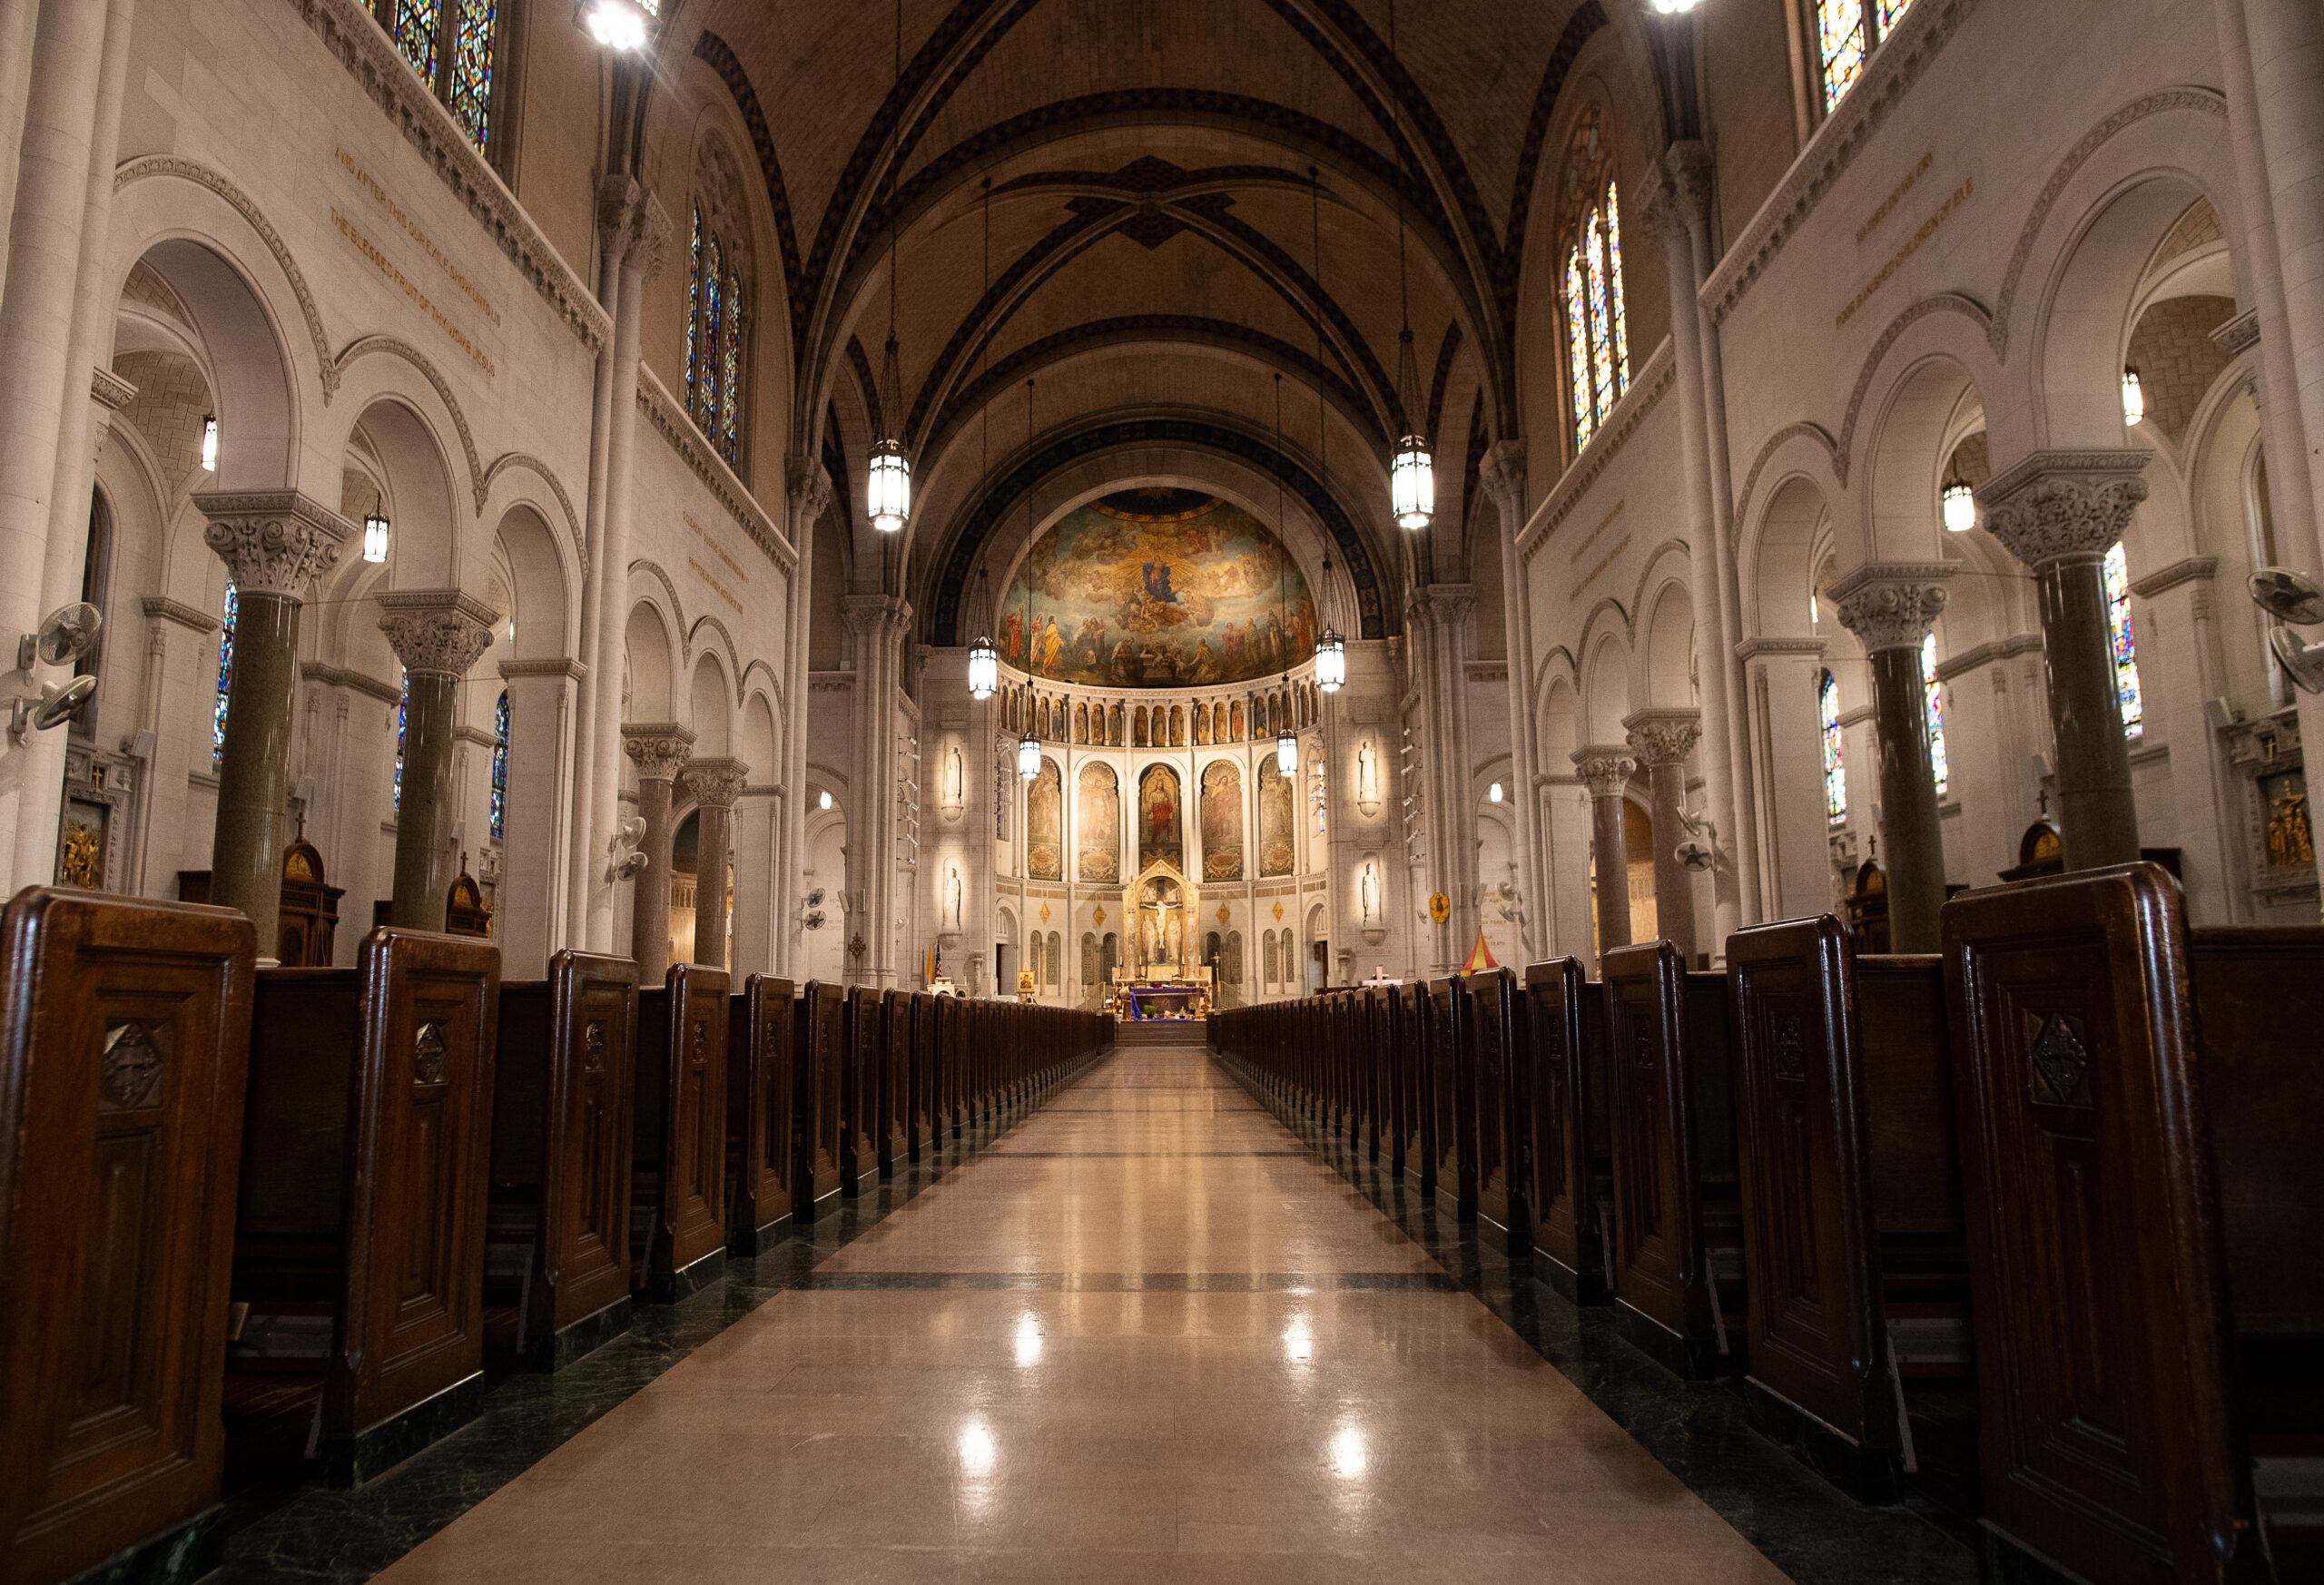 Interior of a cathedral with a long central aisle flanked by wooden pews, leading to an altar with ornate decorations and stained glass windows. arched ceilings feature detailed artwork.